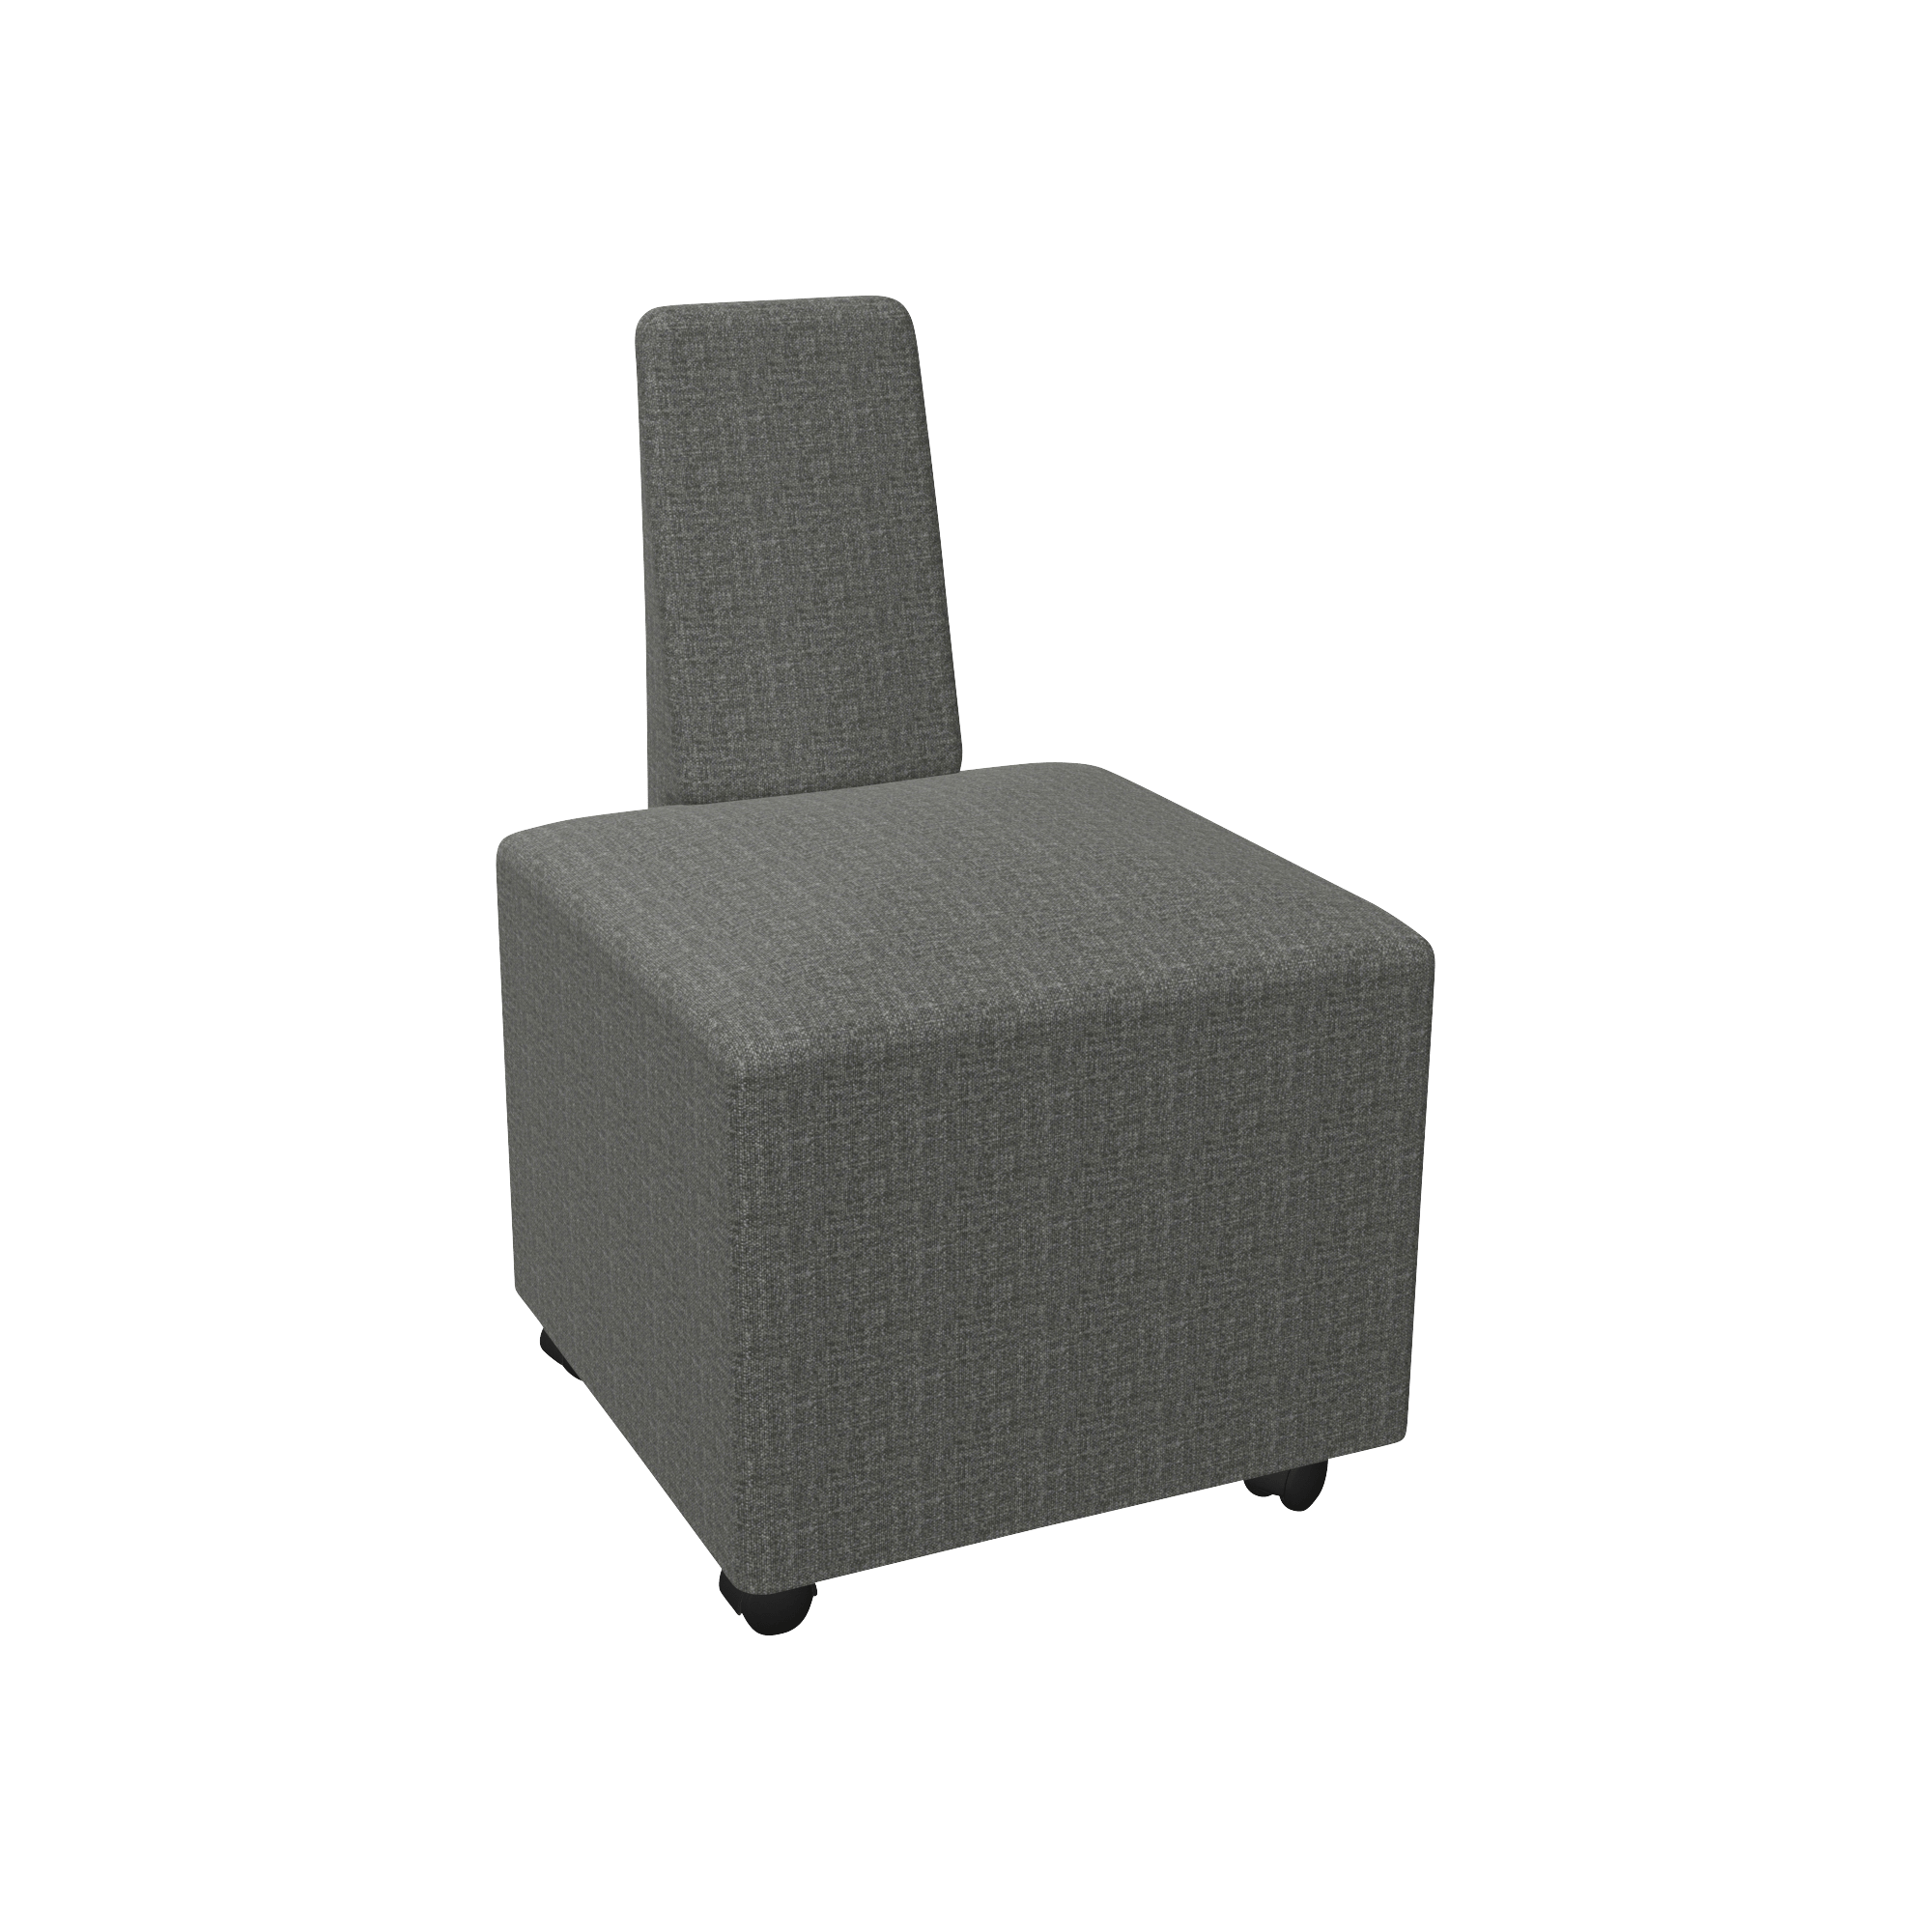 upholstered scooter chair with narrow back rests